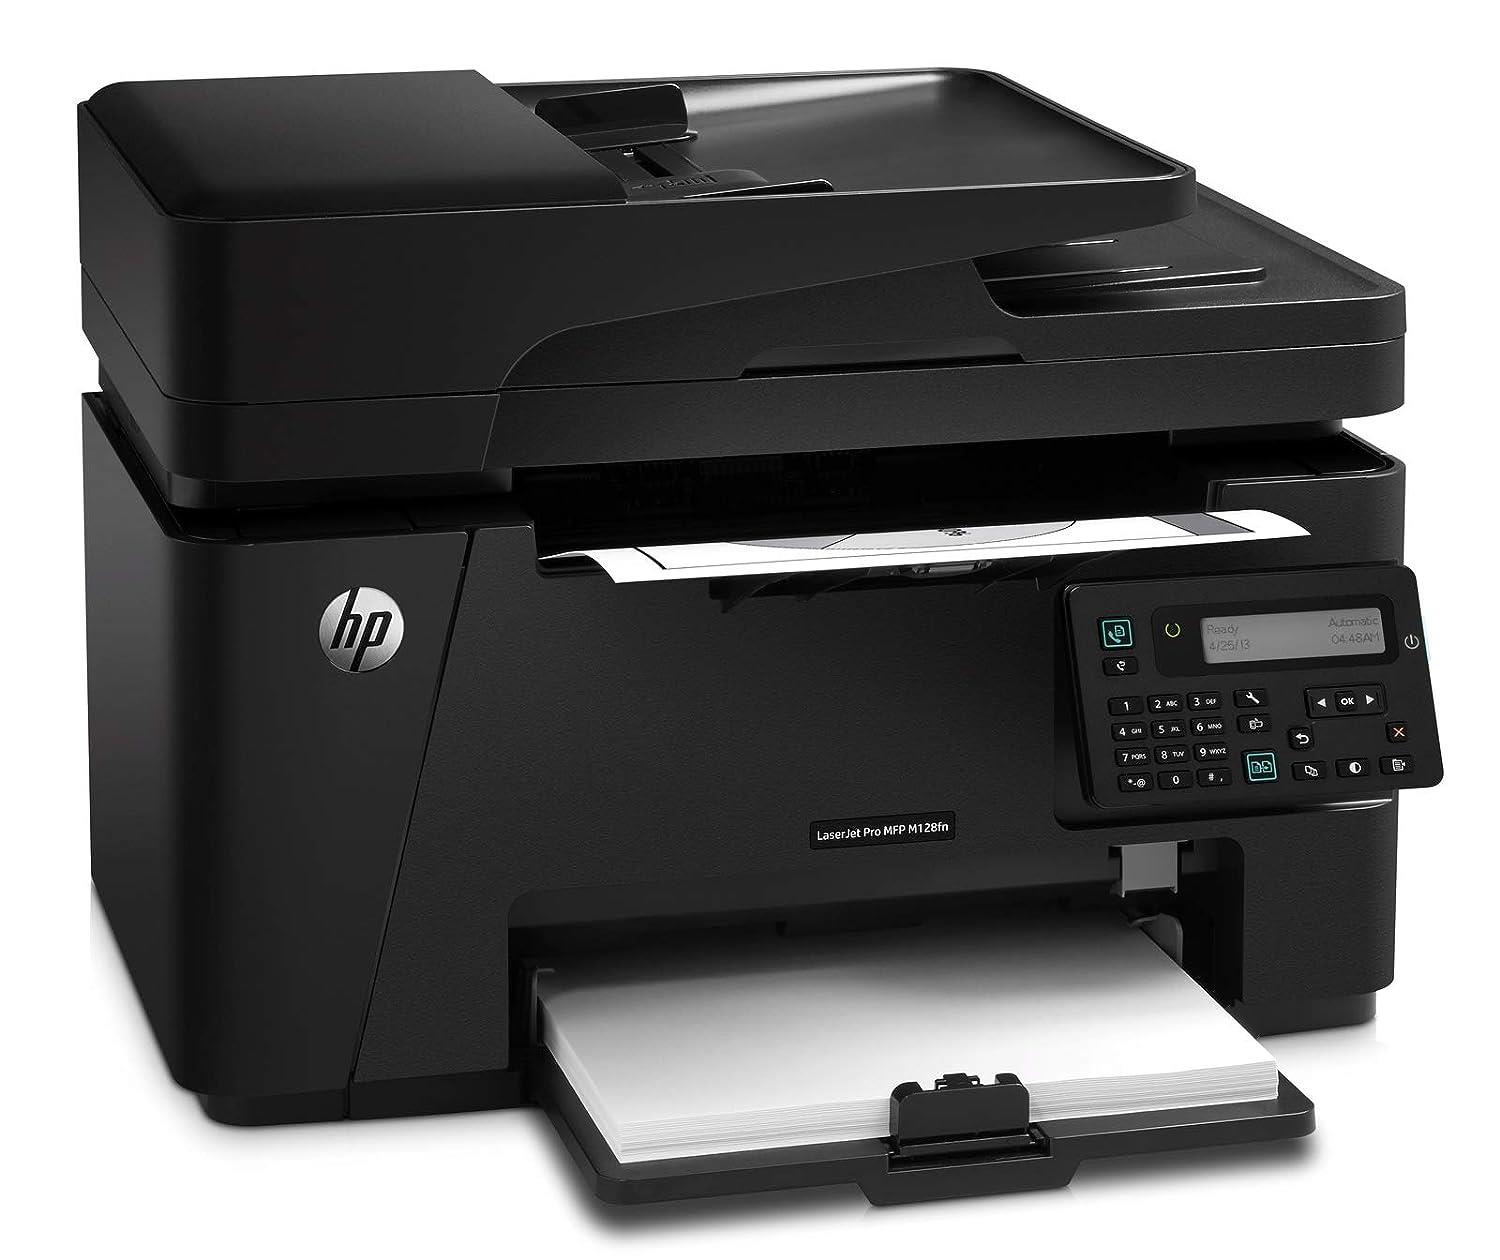 HP MFP M128fn Laserjet Printer: Print, Copy, Scan, Automatic Document Feeder, Ethernet, Fast Printing Upto 20Ppm, Easy And Secure Setup, 3Yearwarranty